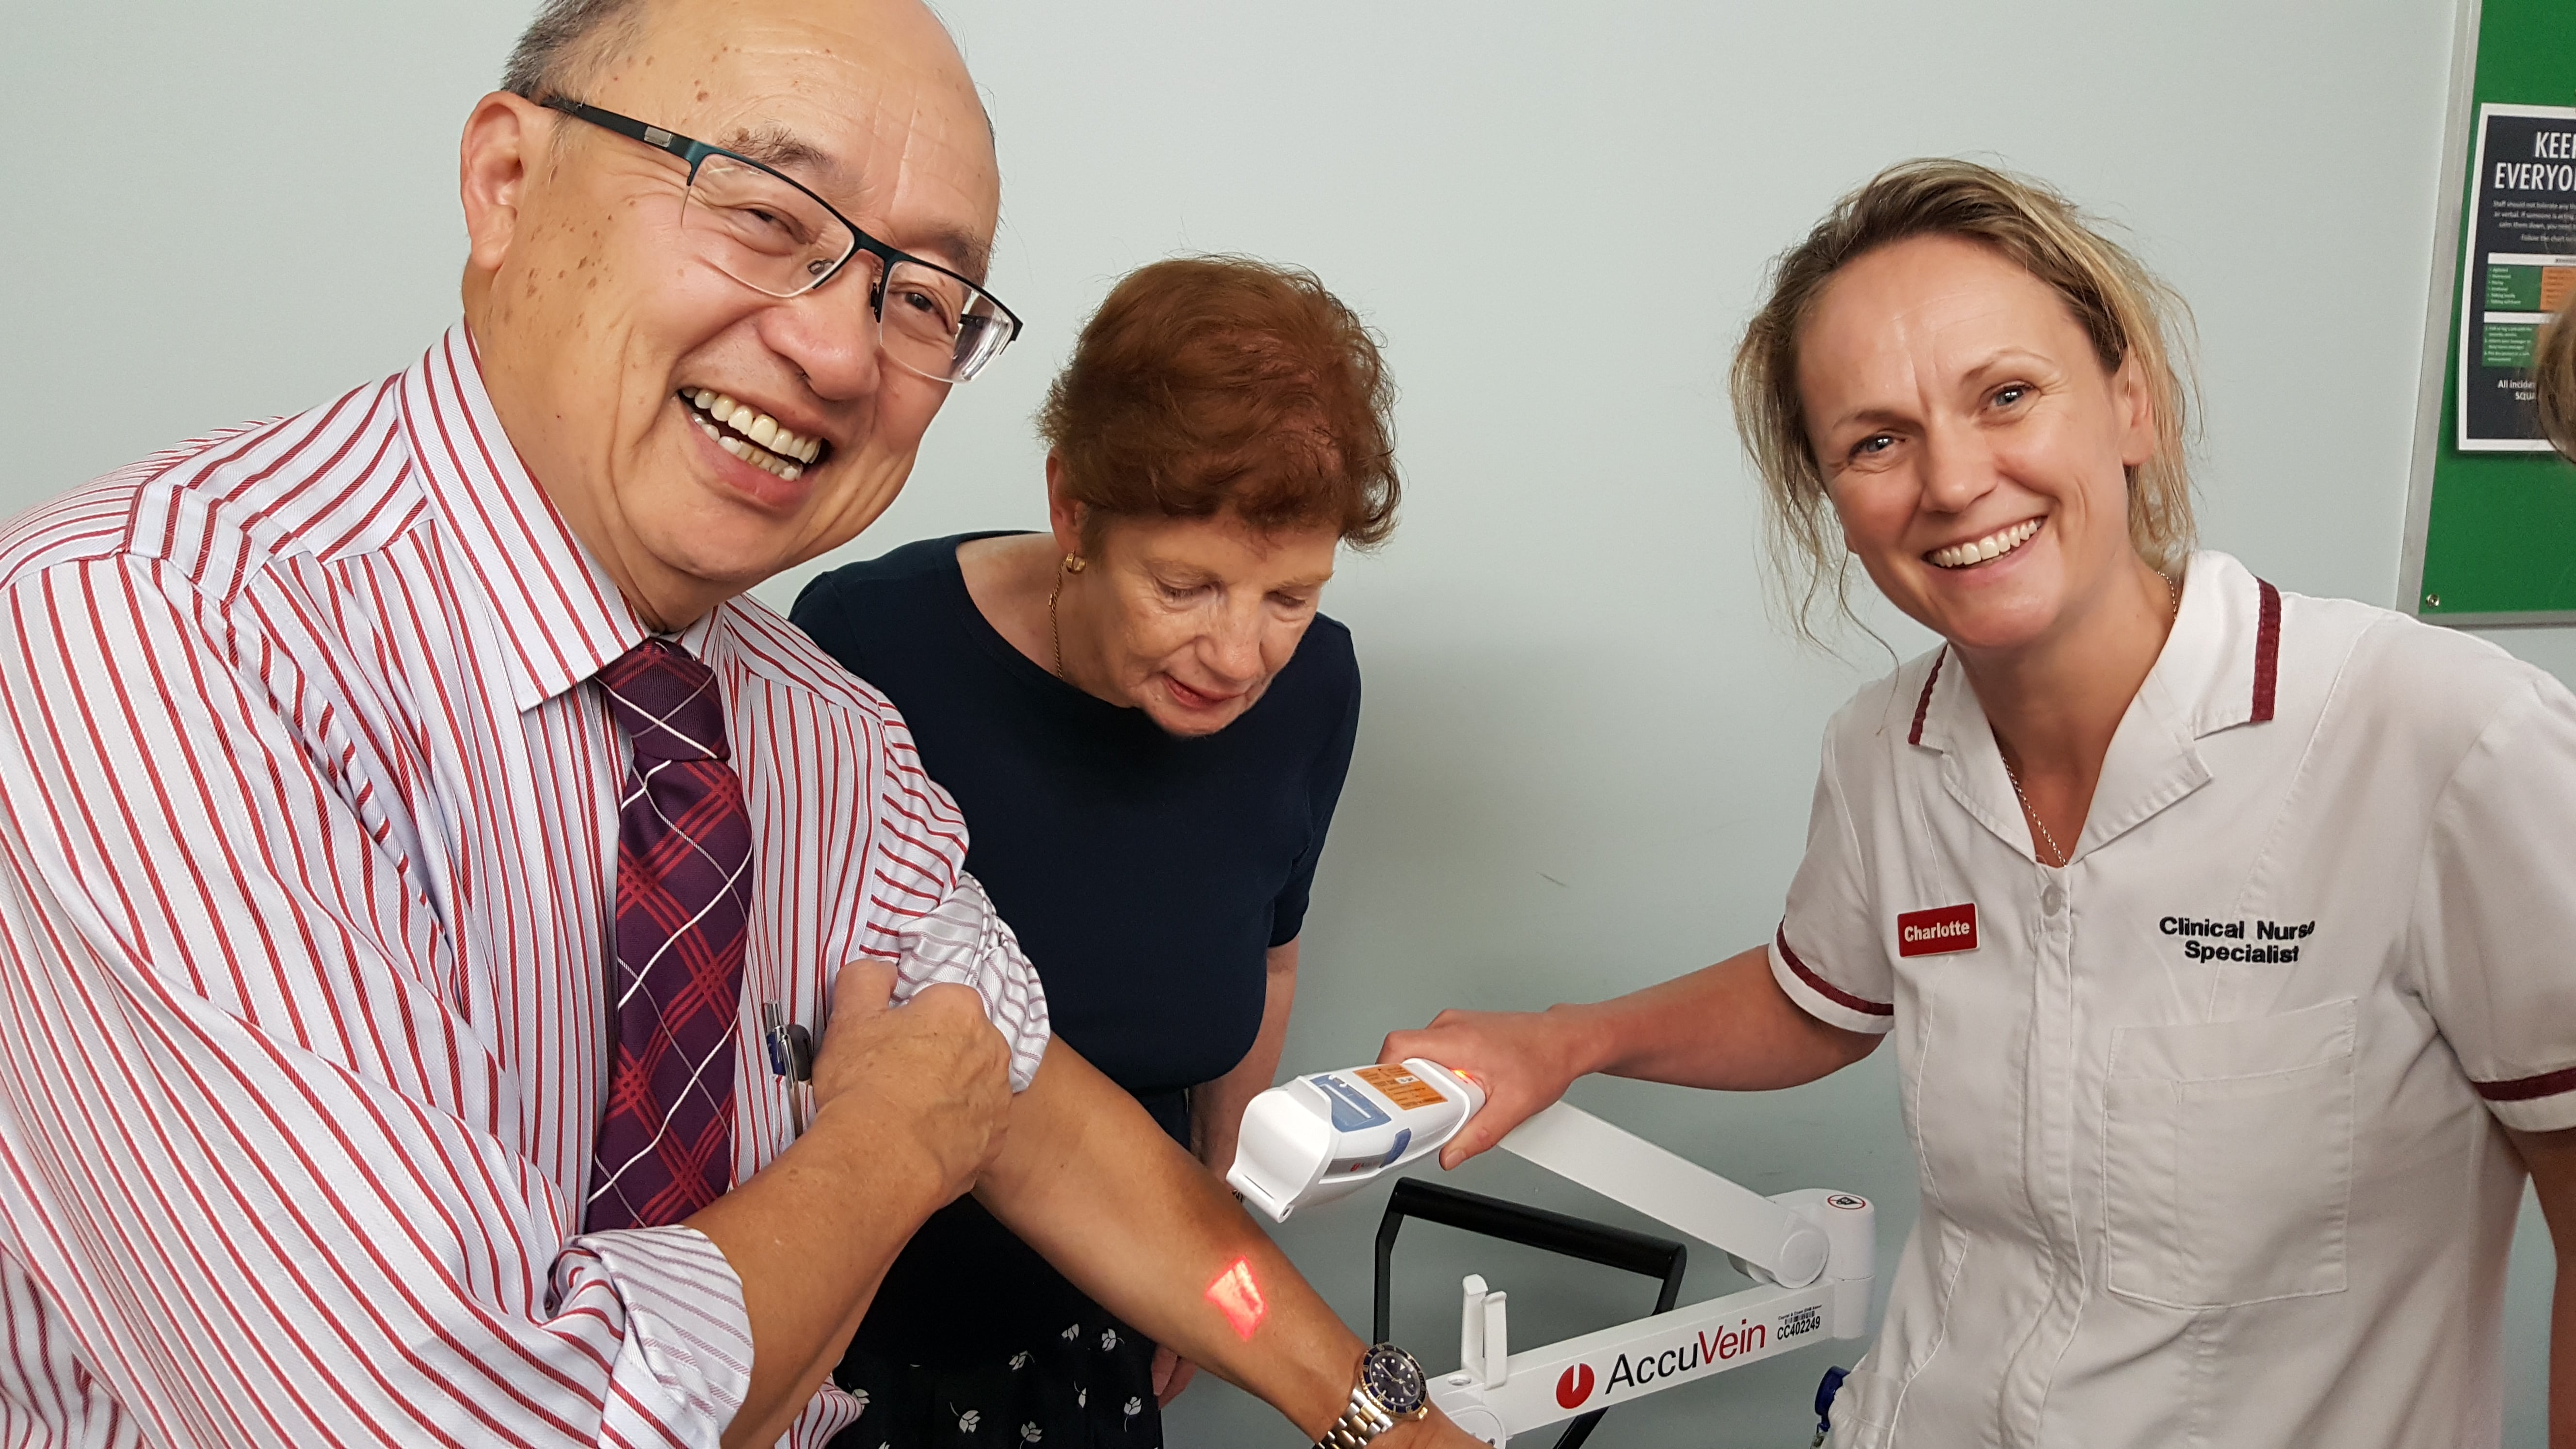 Charlotte Stanczuk (Clinical Nurse Specialist, Wellington Regional Children’s Hospital) shows Mark Chiu and Patricia Cooper (Rotary Club of Mt Victoria members) how the AccuVien Device works.